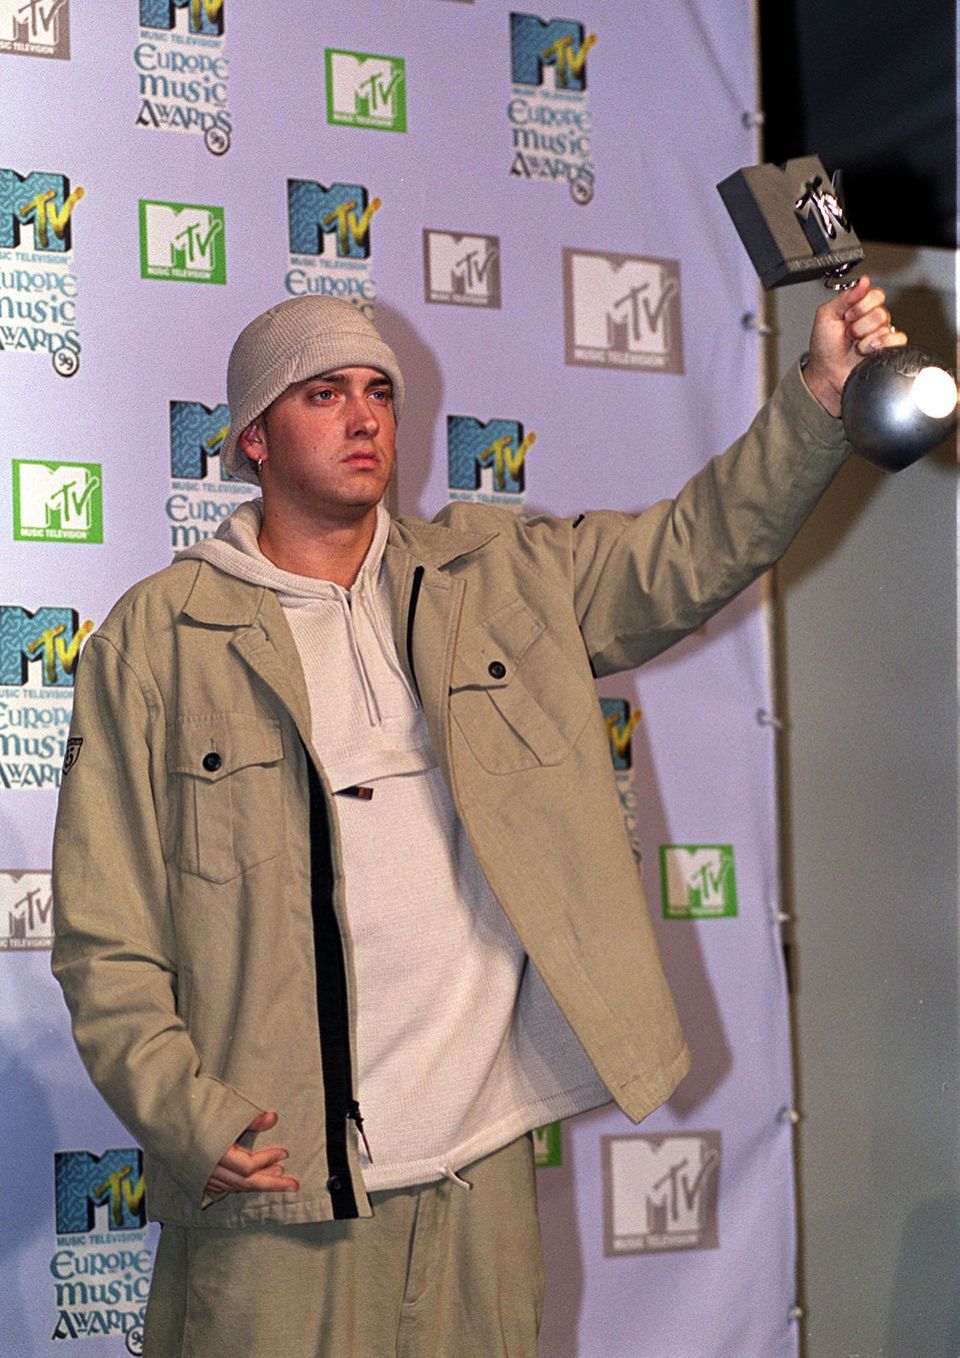 A Look Back At Eminem's Image Over The Years